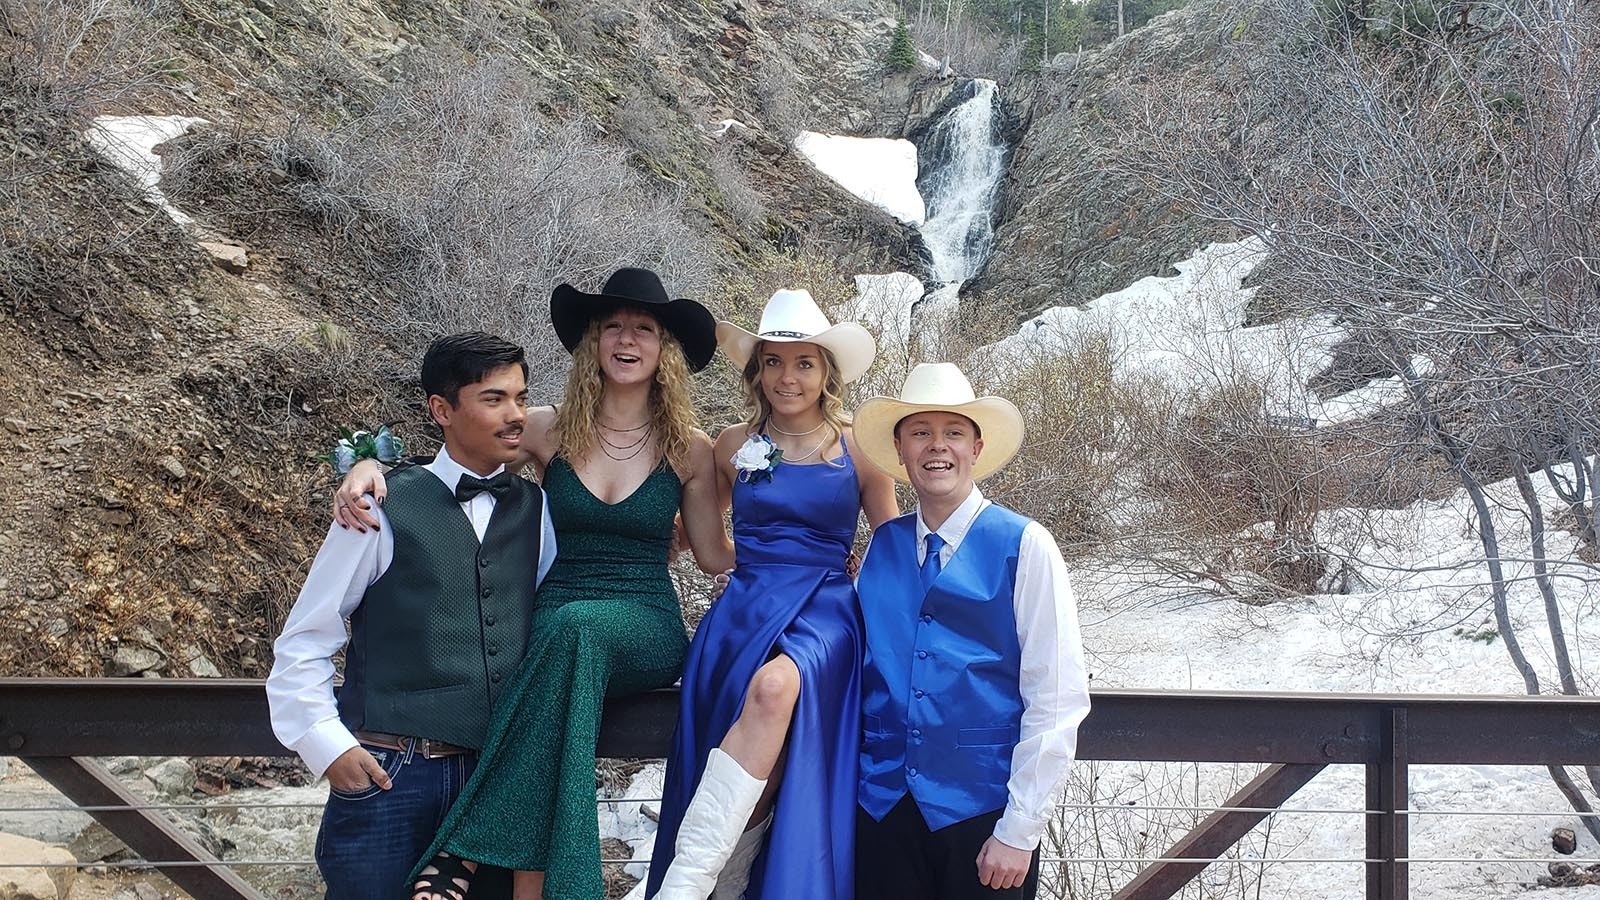 Cadence Kiser and Kota Yann in green pose with Aspen Chambers and Jacz Ellis in blue in front of the waterfall before their prom.